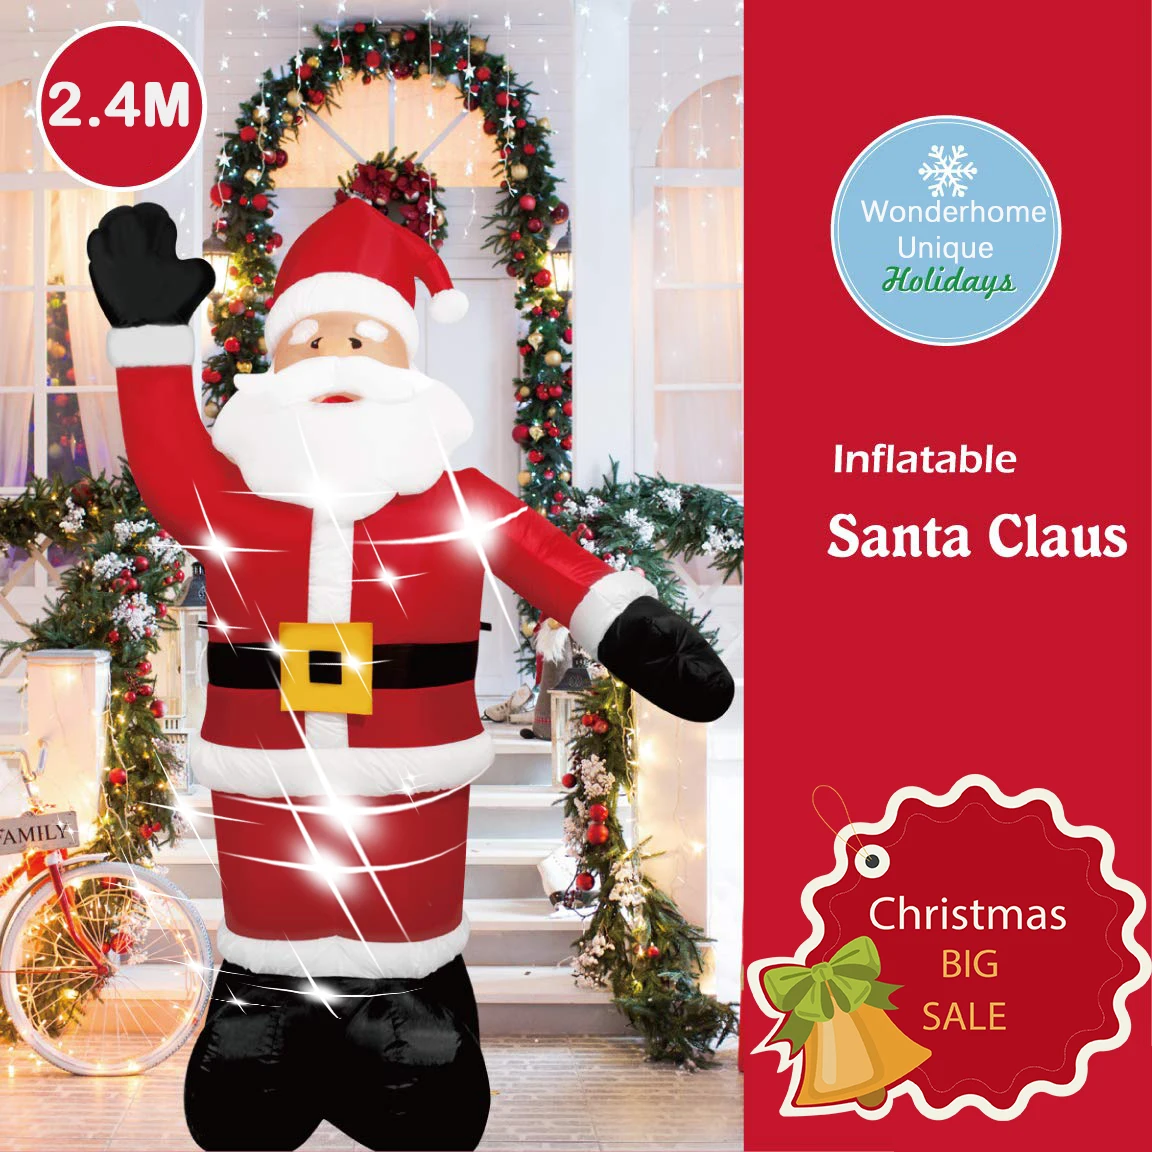 

2.4M Christmas Inflatable Santa Claus Light Up Inflatable Soldier Nutcracker Yard Garden Christmas Decoration 2.4M 8ft